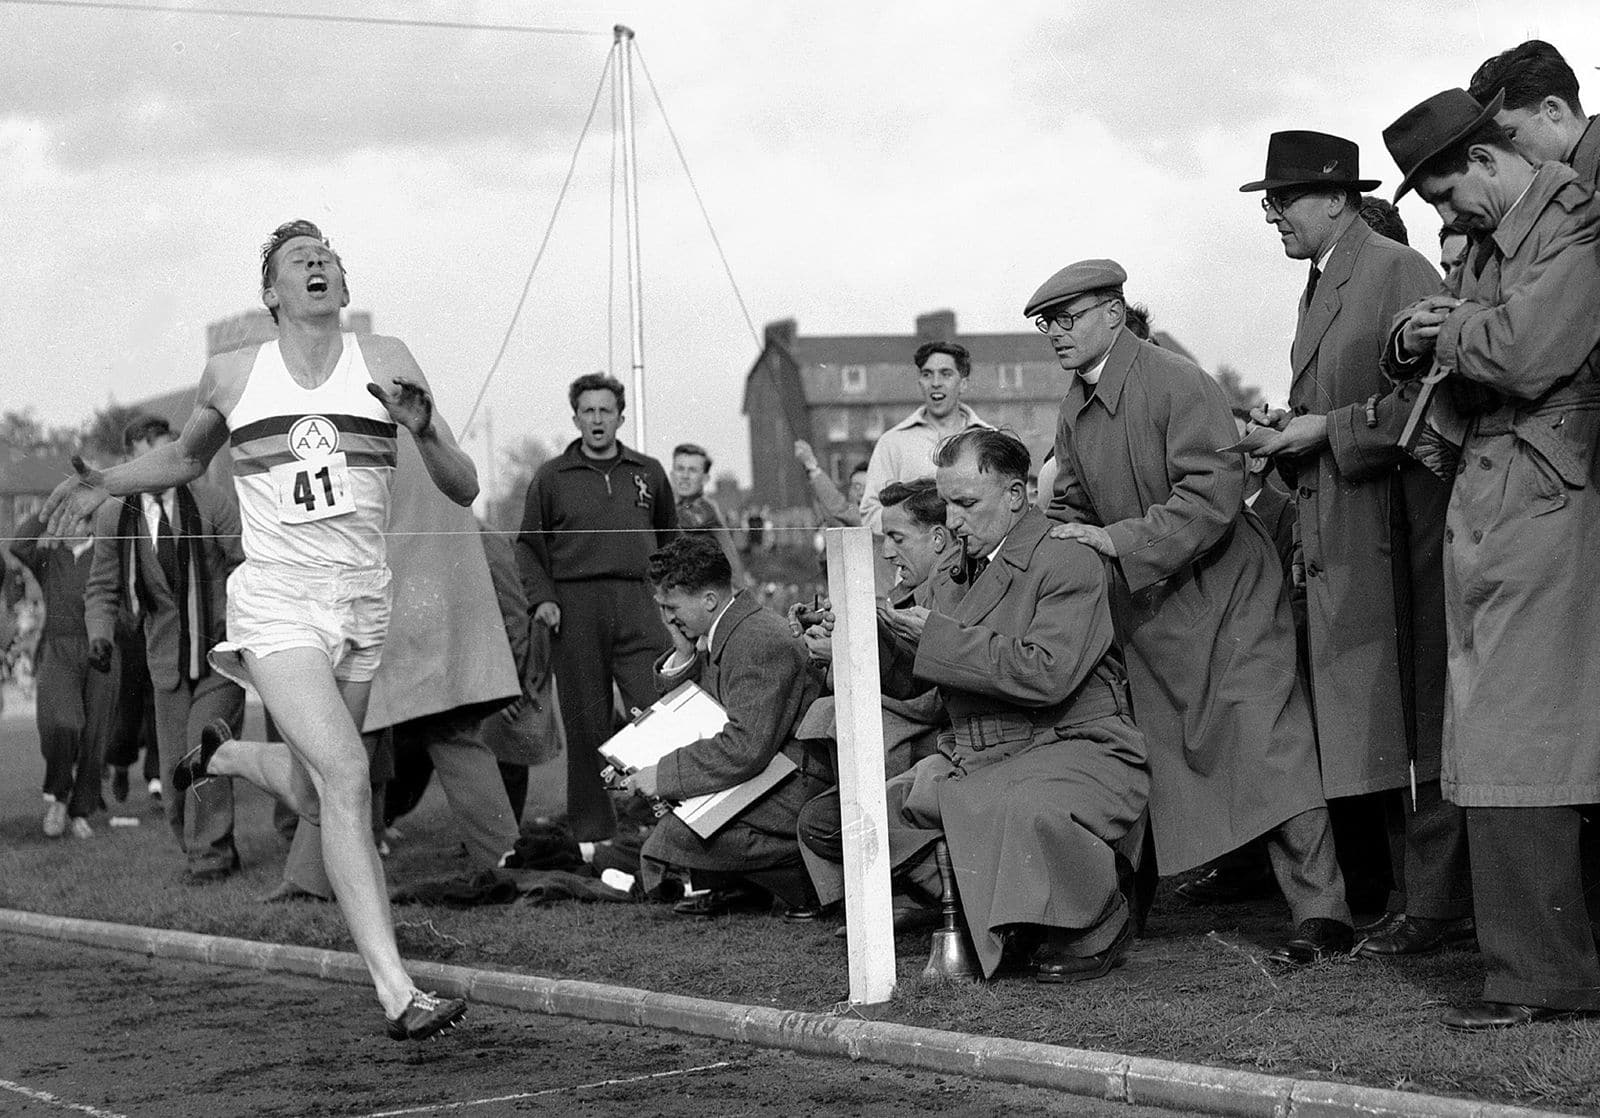 FILE - In this May 6, 1954 file photo, Britain's Roger Bannister hits the tape to become the first person to break the four-minute mile in Oxford, England. A statement released Sunday March 4, 2018, on behalf of Bannister's family said Sir Roger Bannister died peacefully in Oxford on March 3, aged 88. (AP Photo, File)